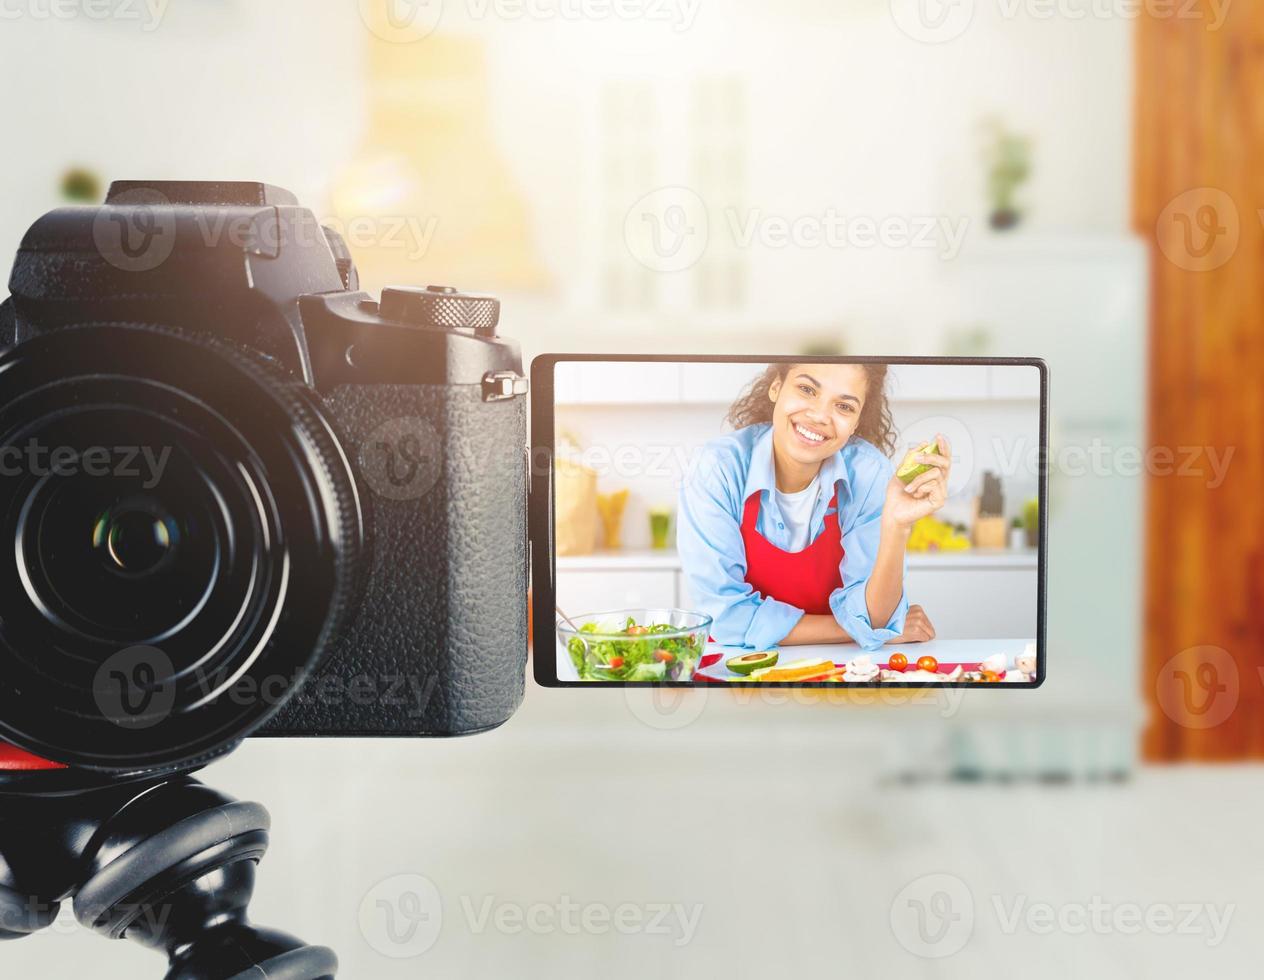 Vlogger woman chef records a video of cooking recipe photo